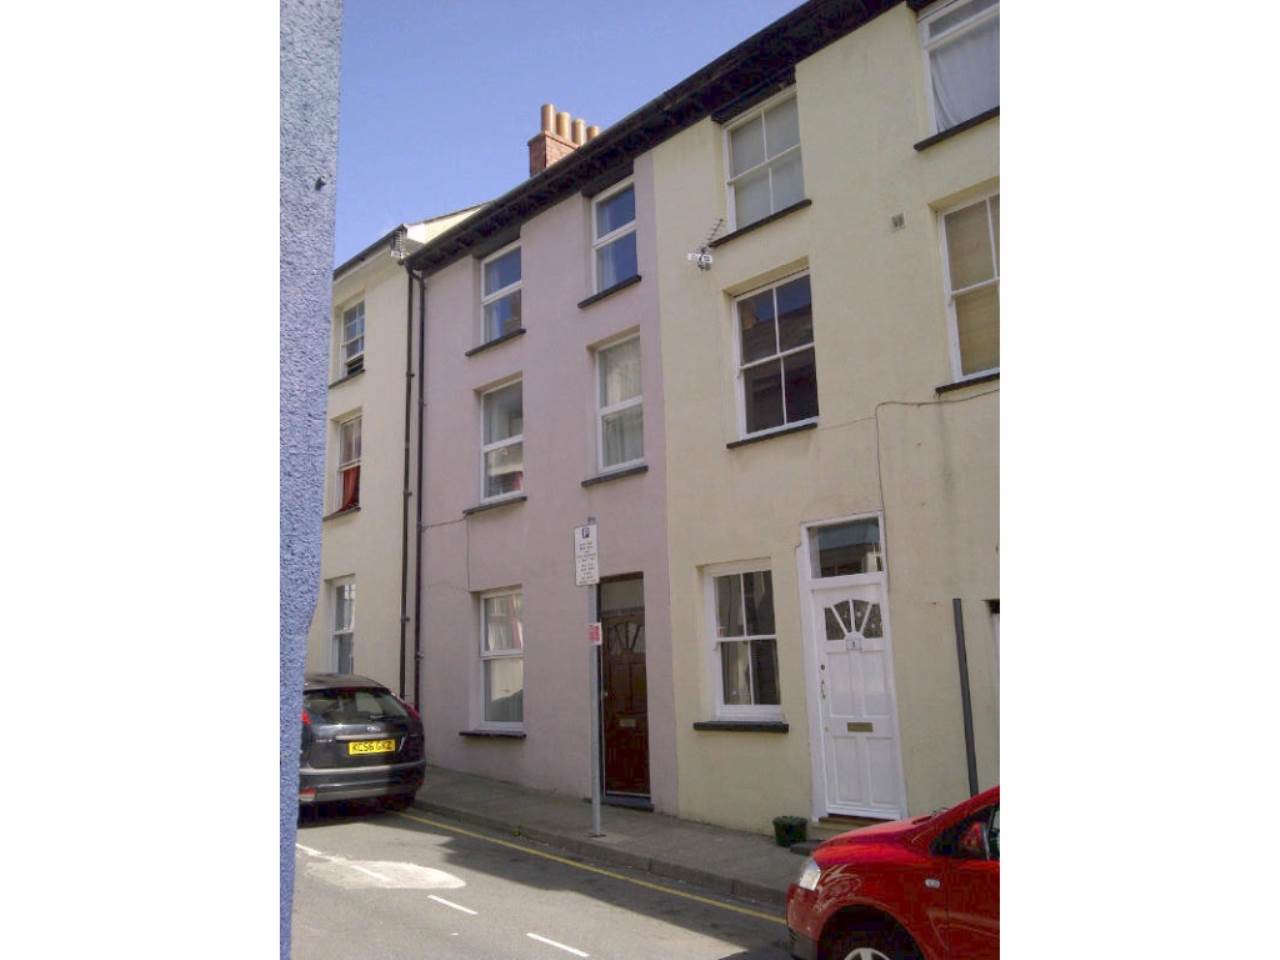 3 bed house to rent in George Street, Aberystwyth - Property Image 1